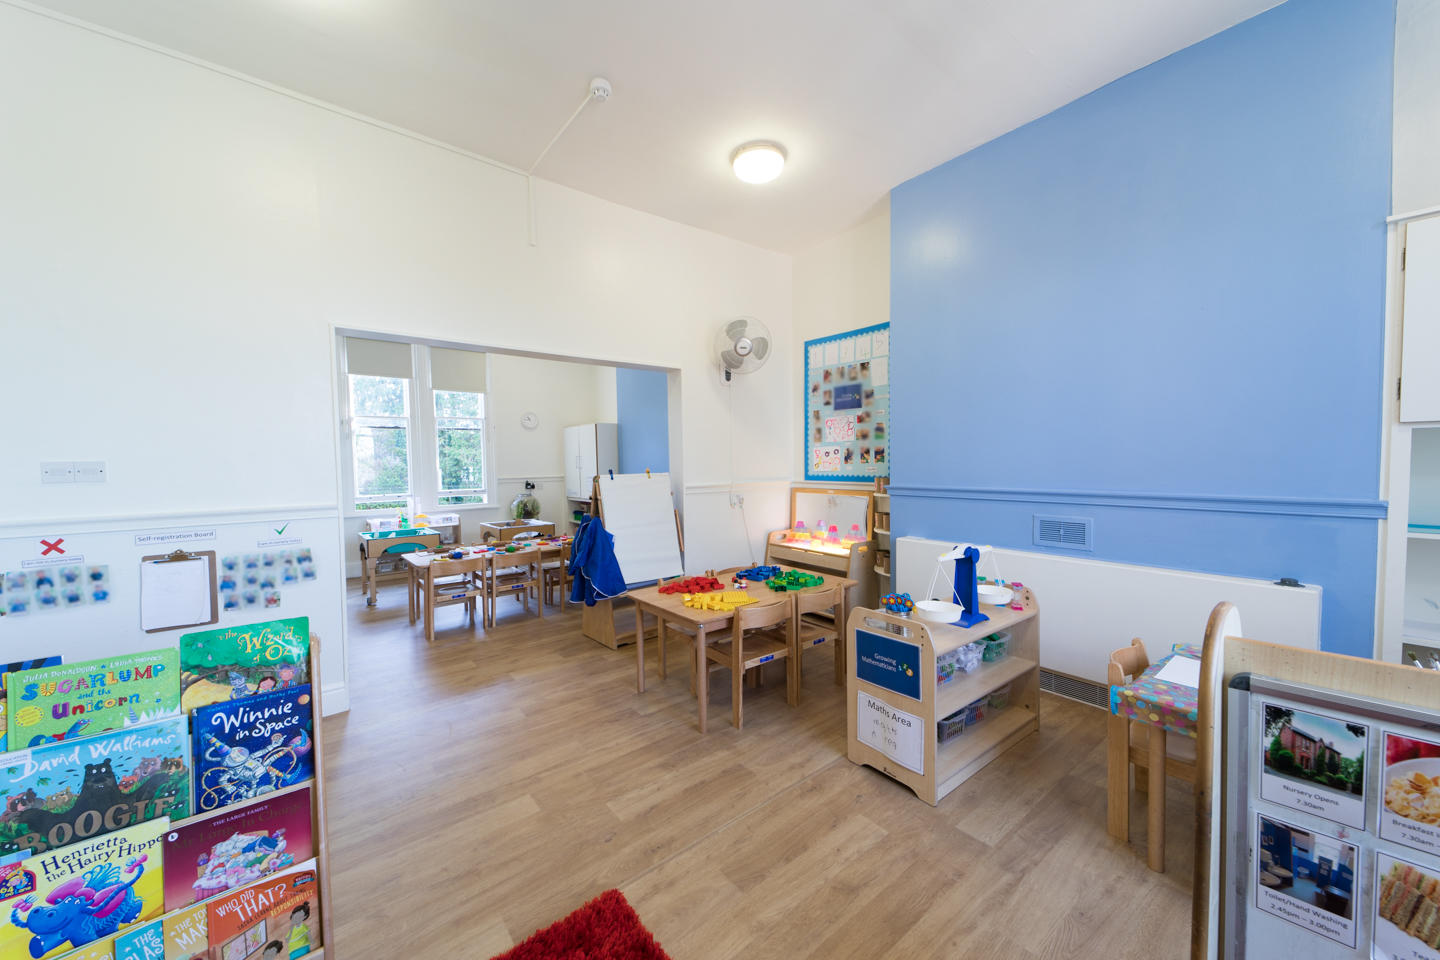 Bright Horizons Clairmont Day Nursery and Preschool Wilmslow 03333 558155